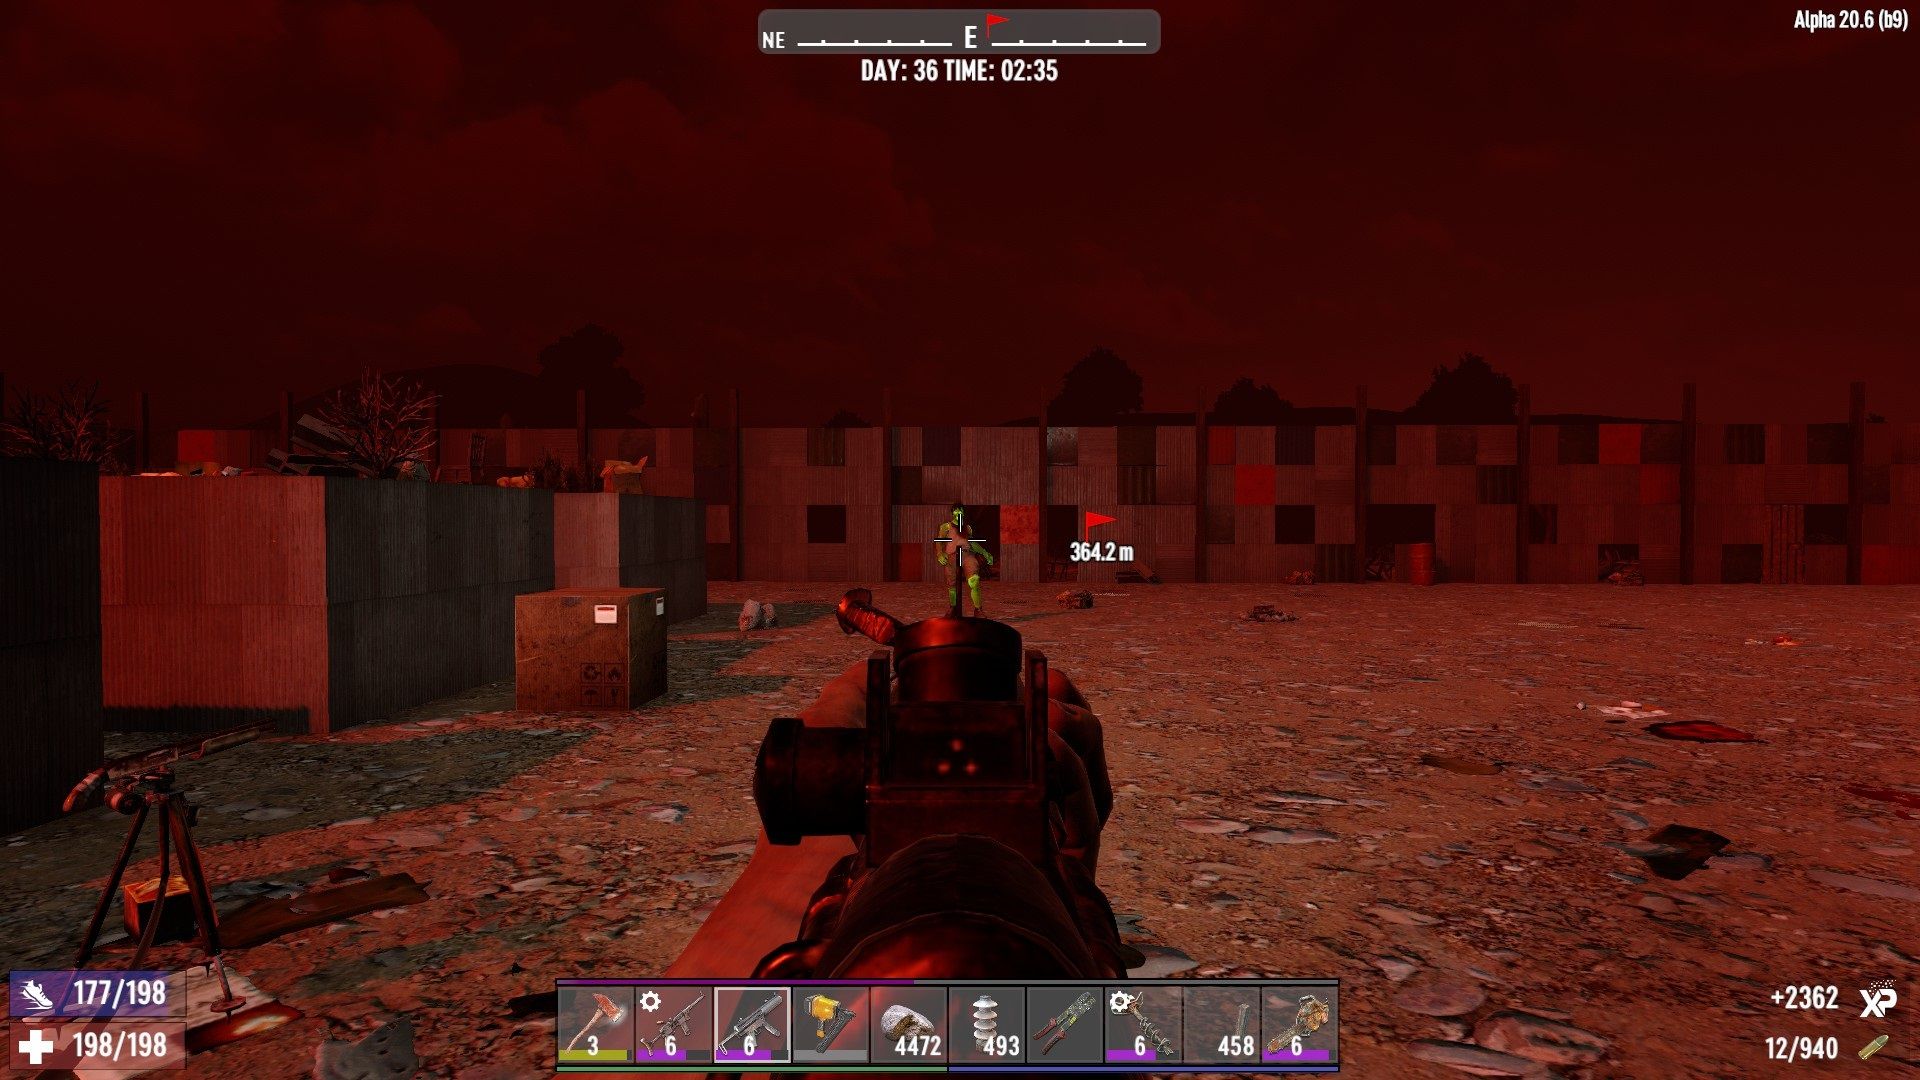 taking out some zombies during a blood moon 7 days to die.jpg